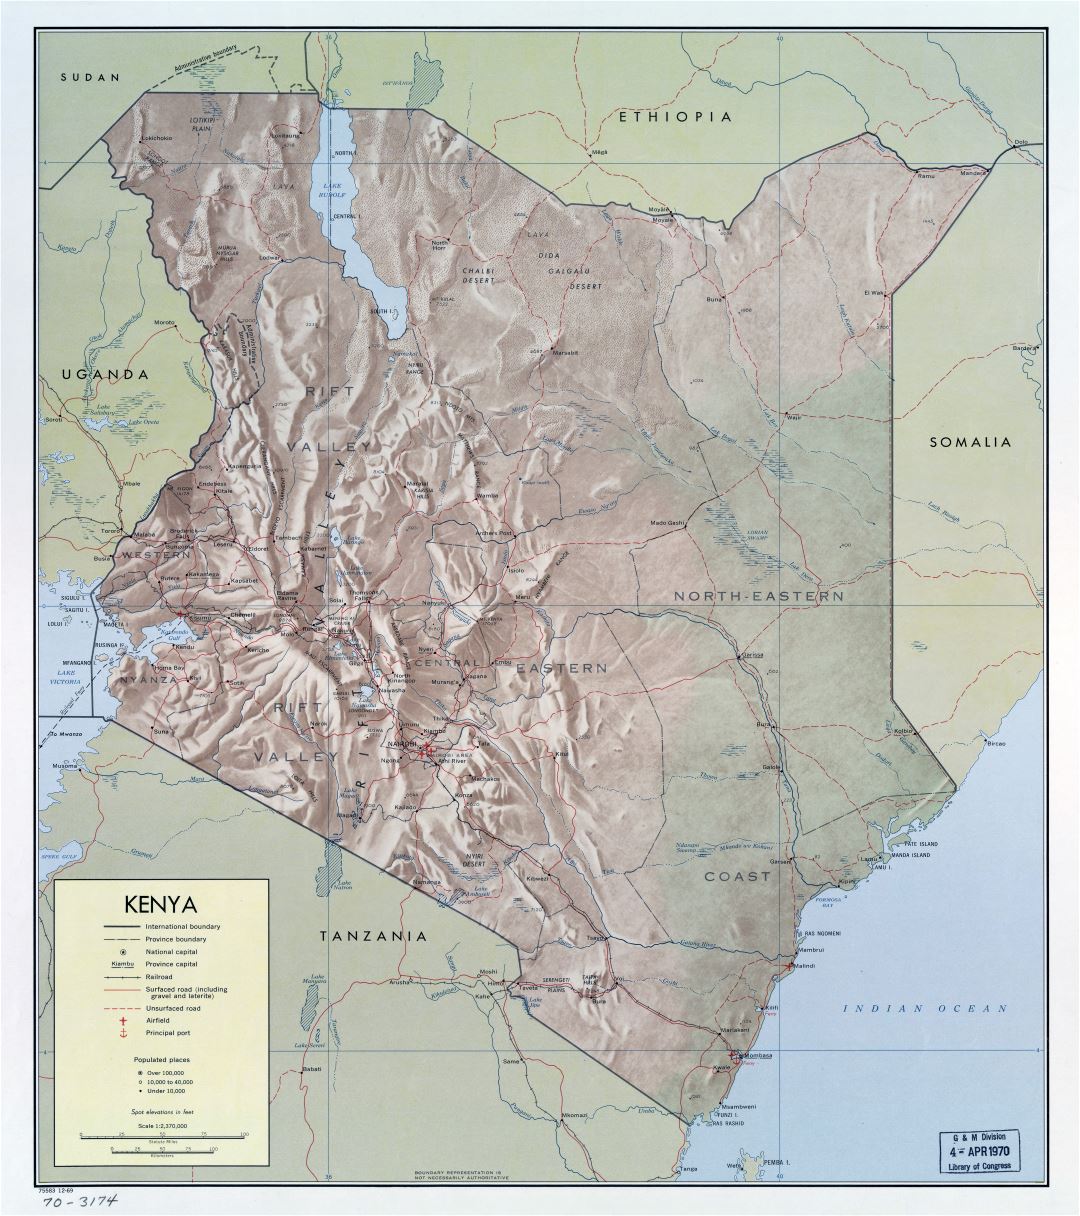 Large scale political and administrative map of Kenya with relief, roads, railroads, cities, ports and airports - 1969